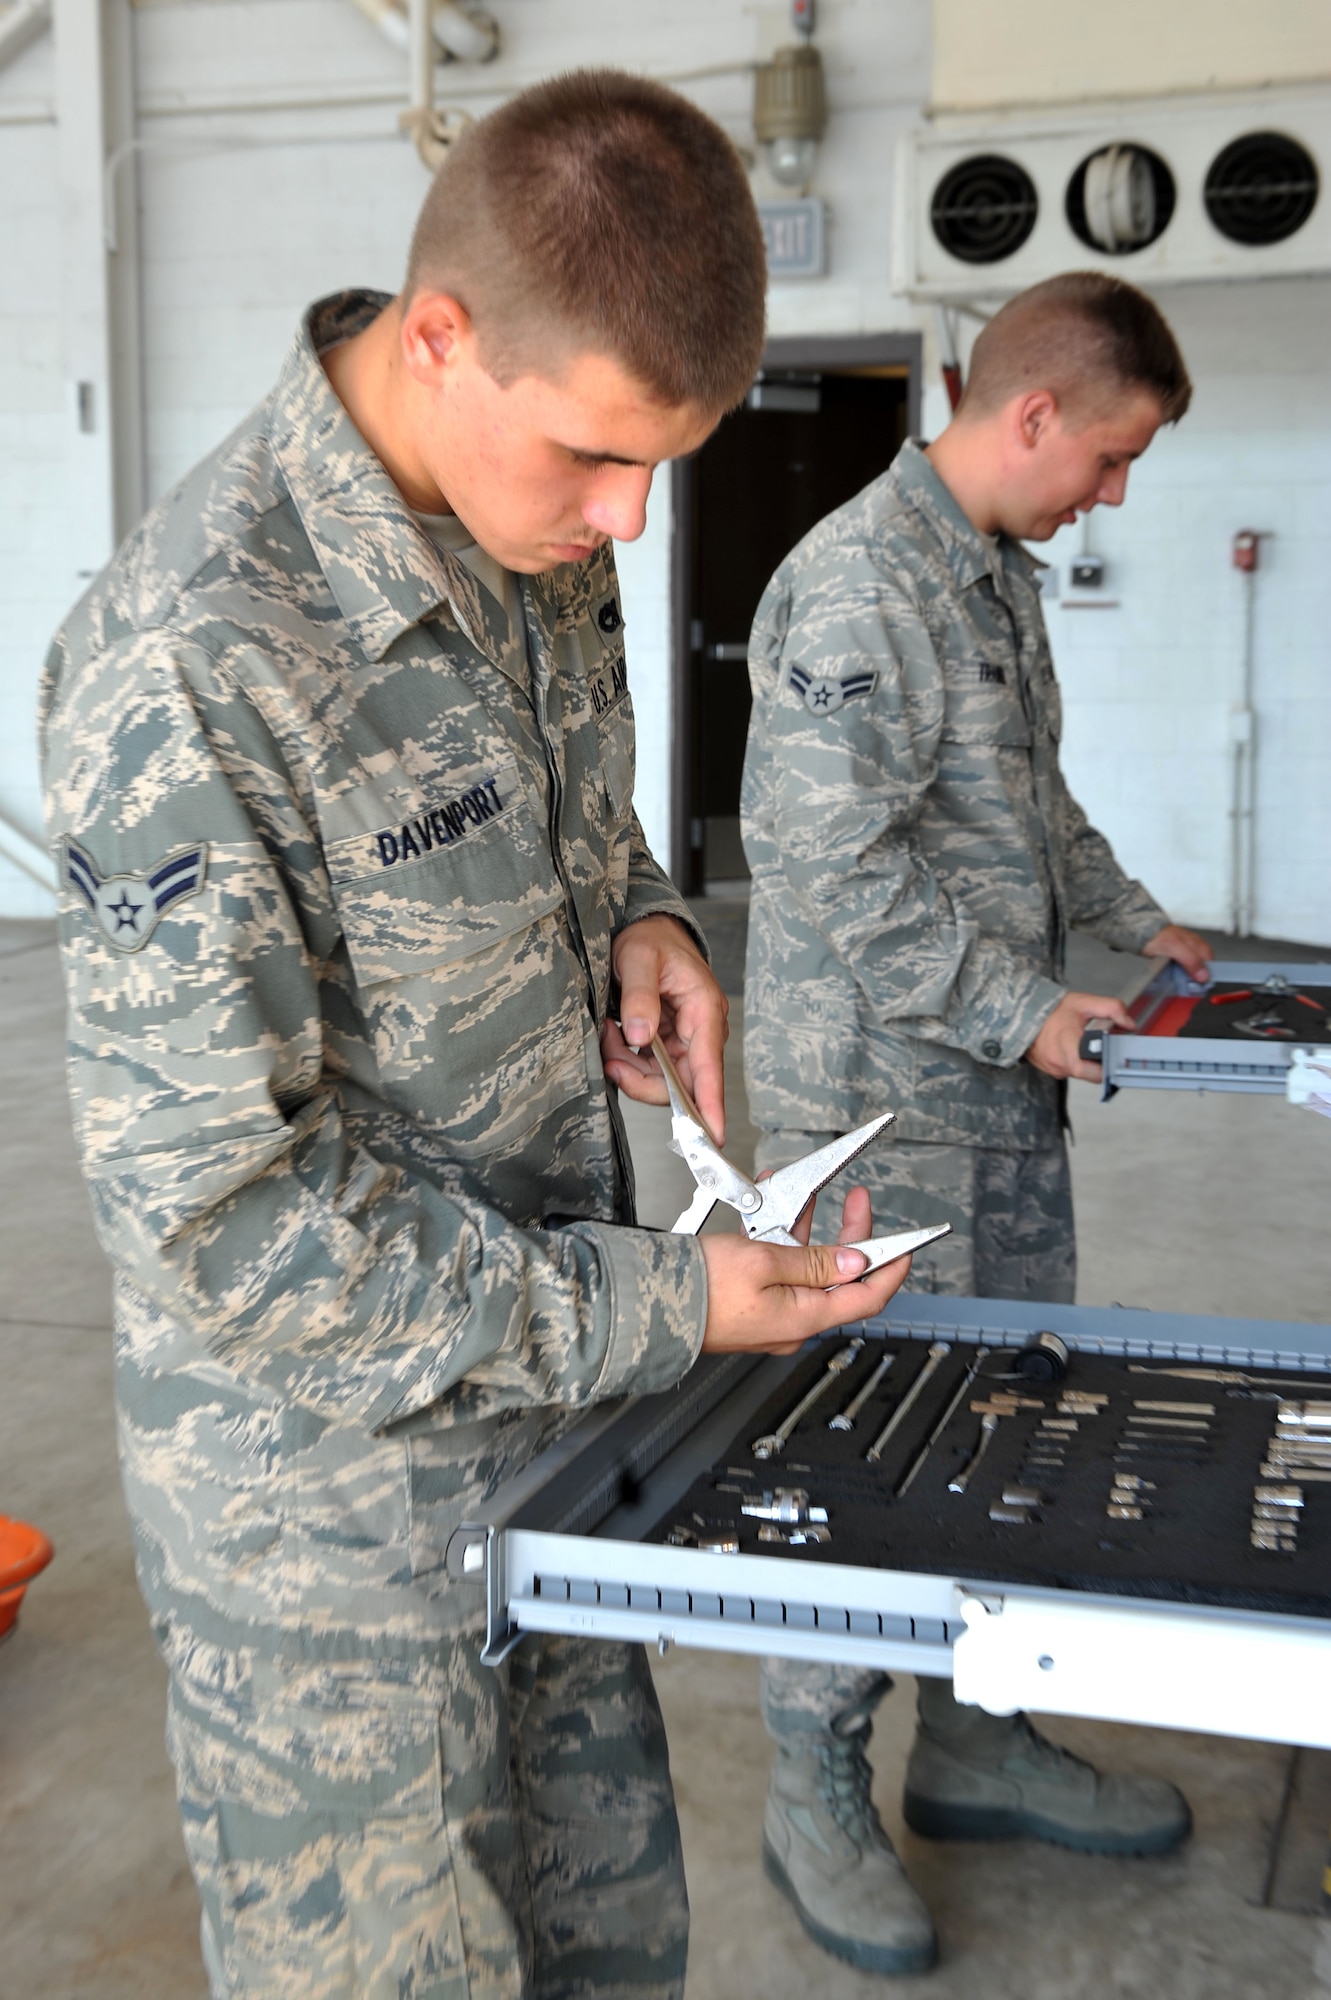 19th Component Maintenance Squadron aircraft fuels systems repair apprentices Airman 1st Class Trenton Davenport (left) and Airman 1st Class James Trainer, choose the right tools for the job July 16. Aircraft fuels systems Airmen ensure accountability and proper care for all equipment while performing daily tasks. (U.S. Air Force photo by Senior Airman Steele C. G. Britton)